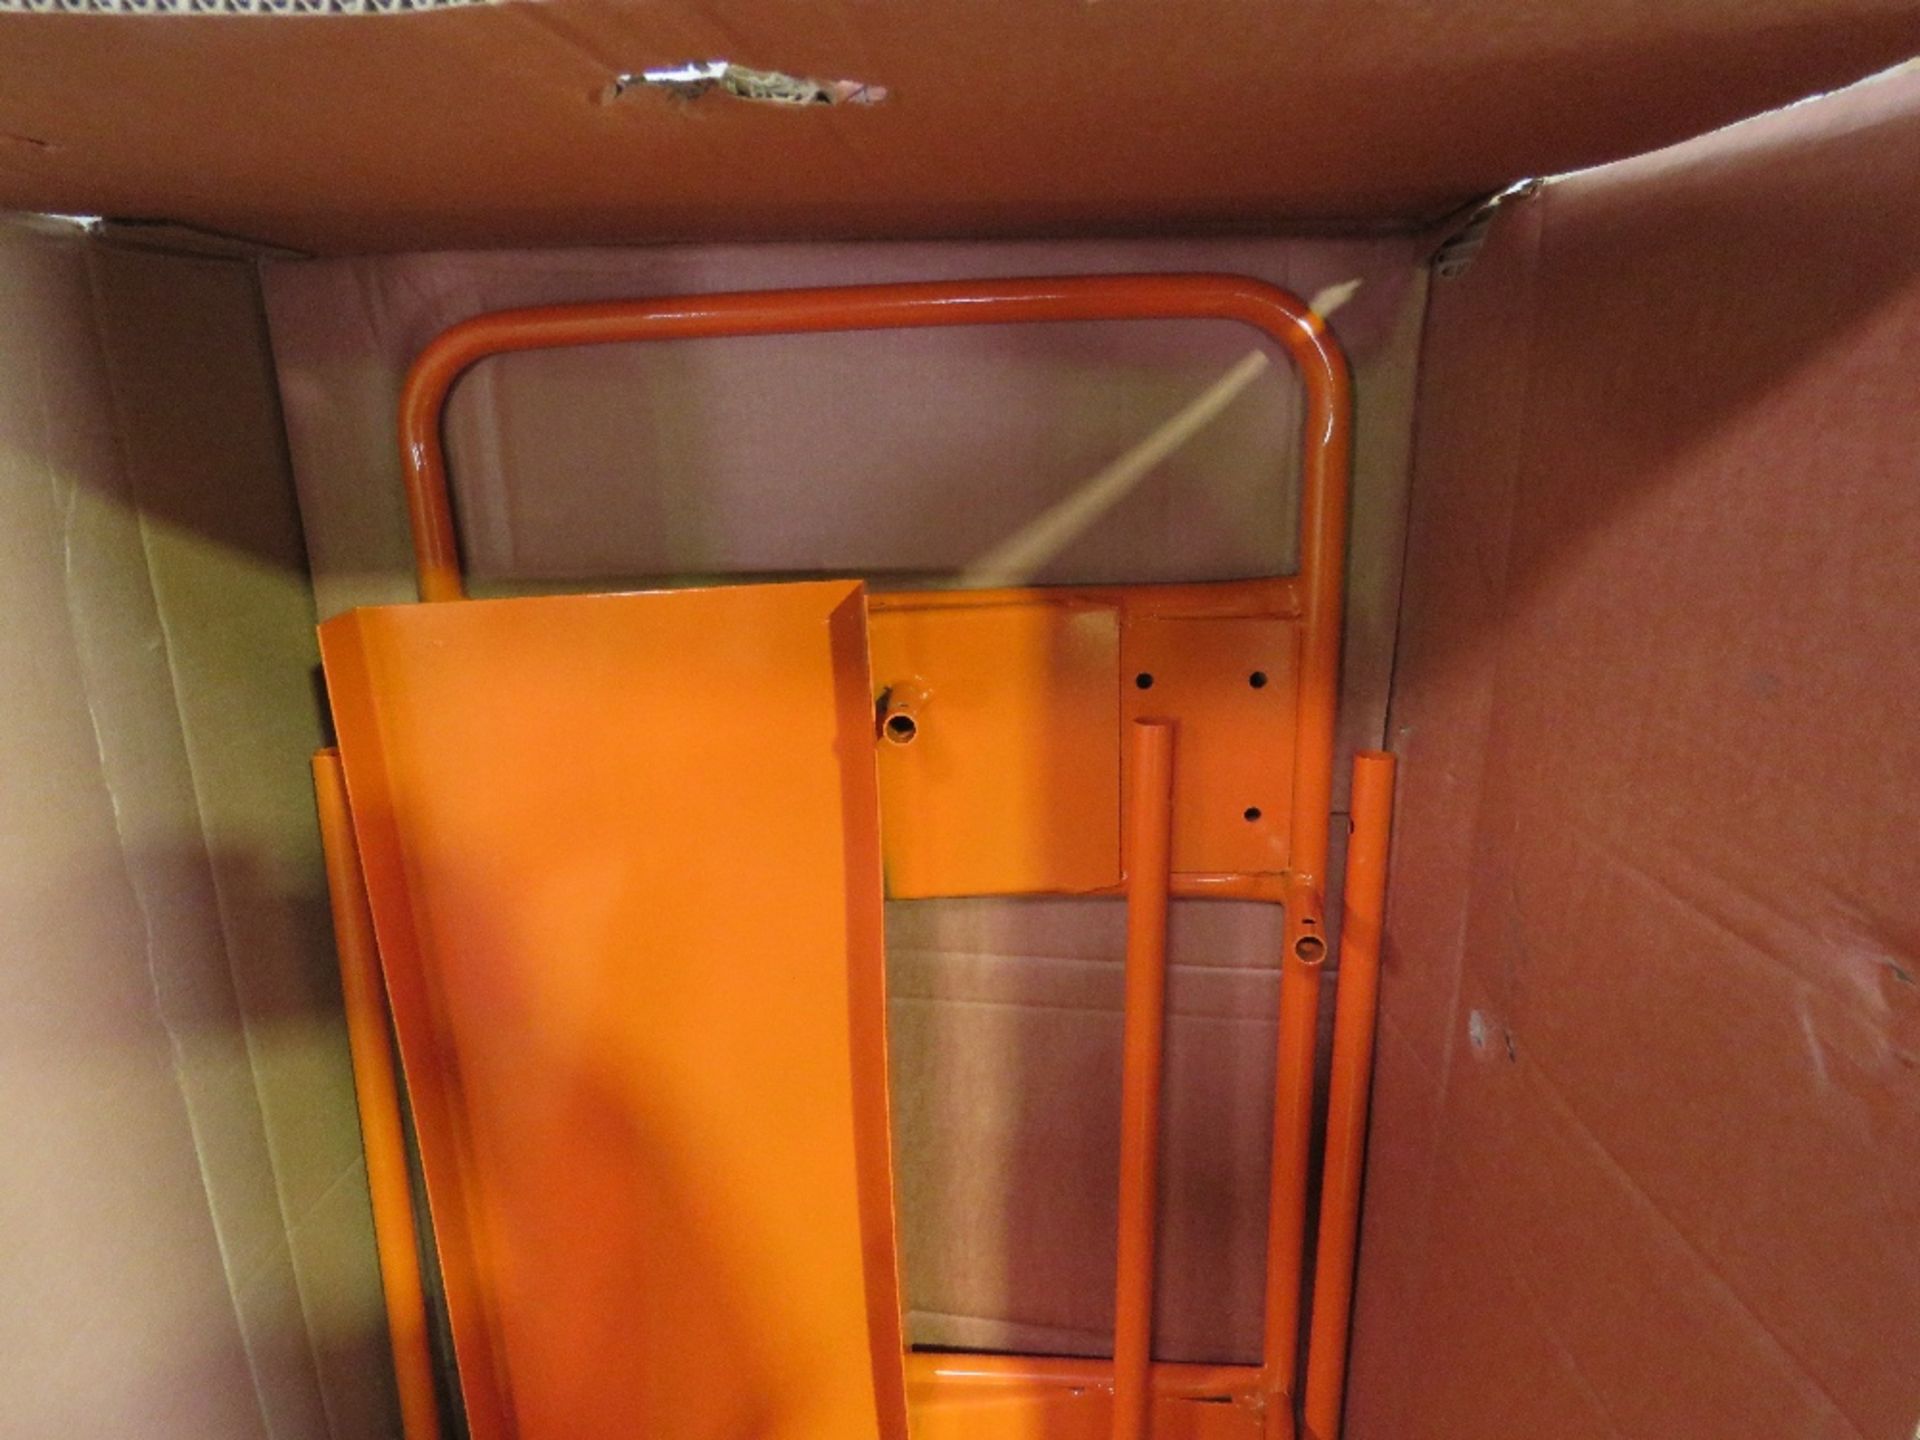 HEAVY DUTY BOARD CARRYING TROLLEY IN A BOX, CONDITION UNKNOWN. - Image 3 of 5